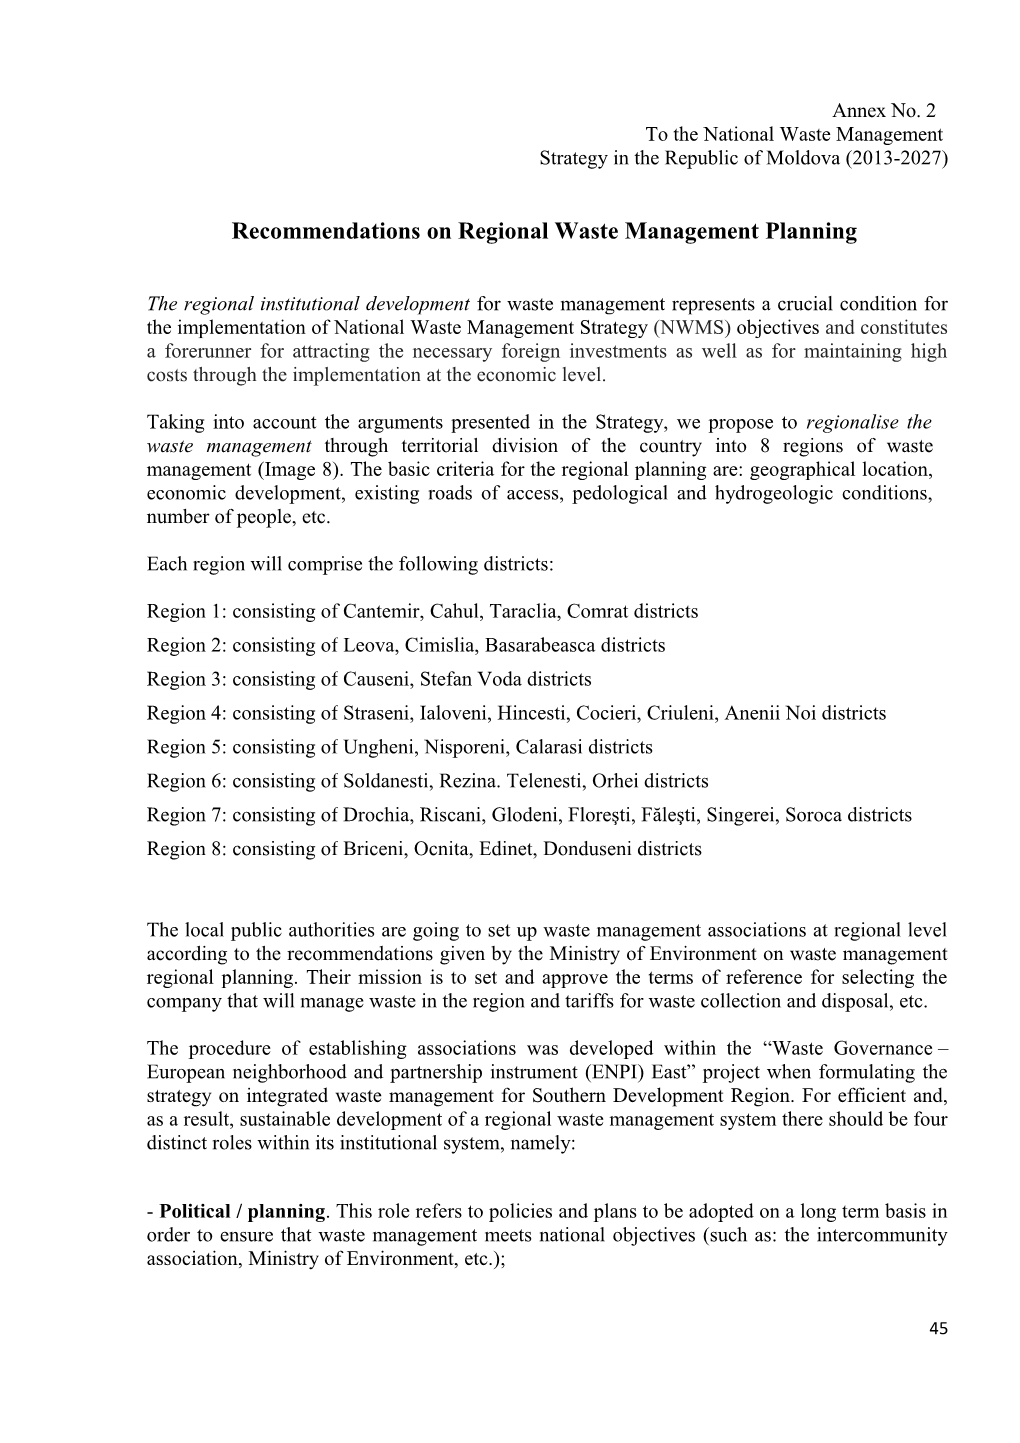 Recommendations on Regional Waste Management Planning